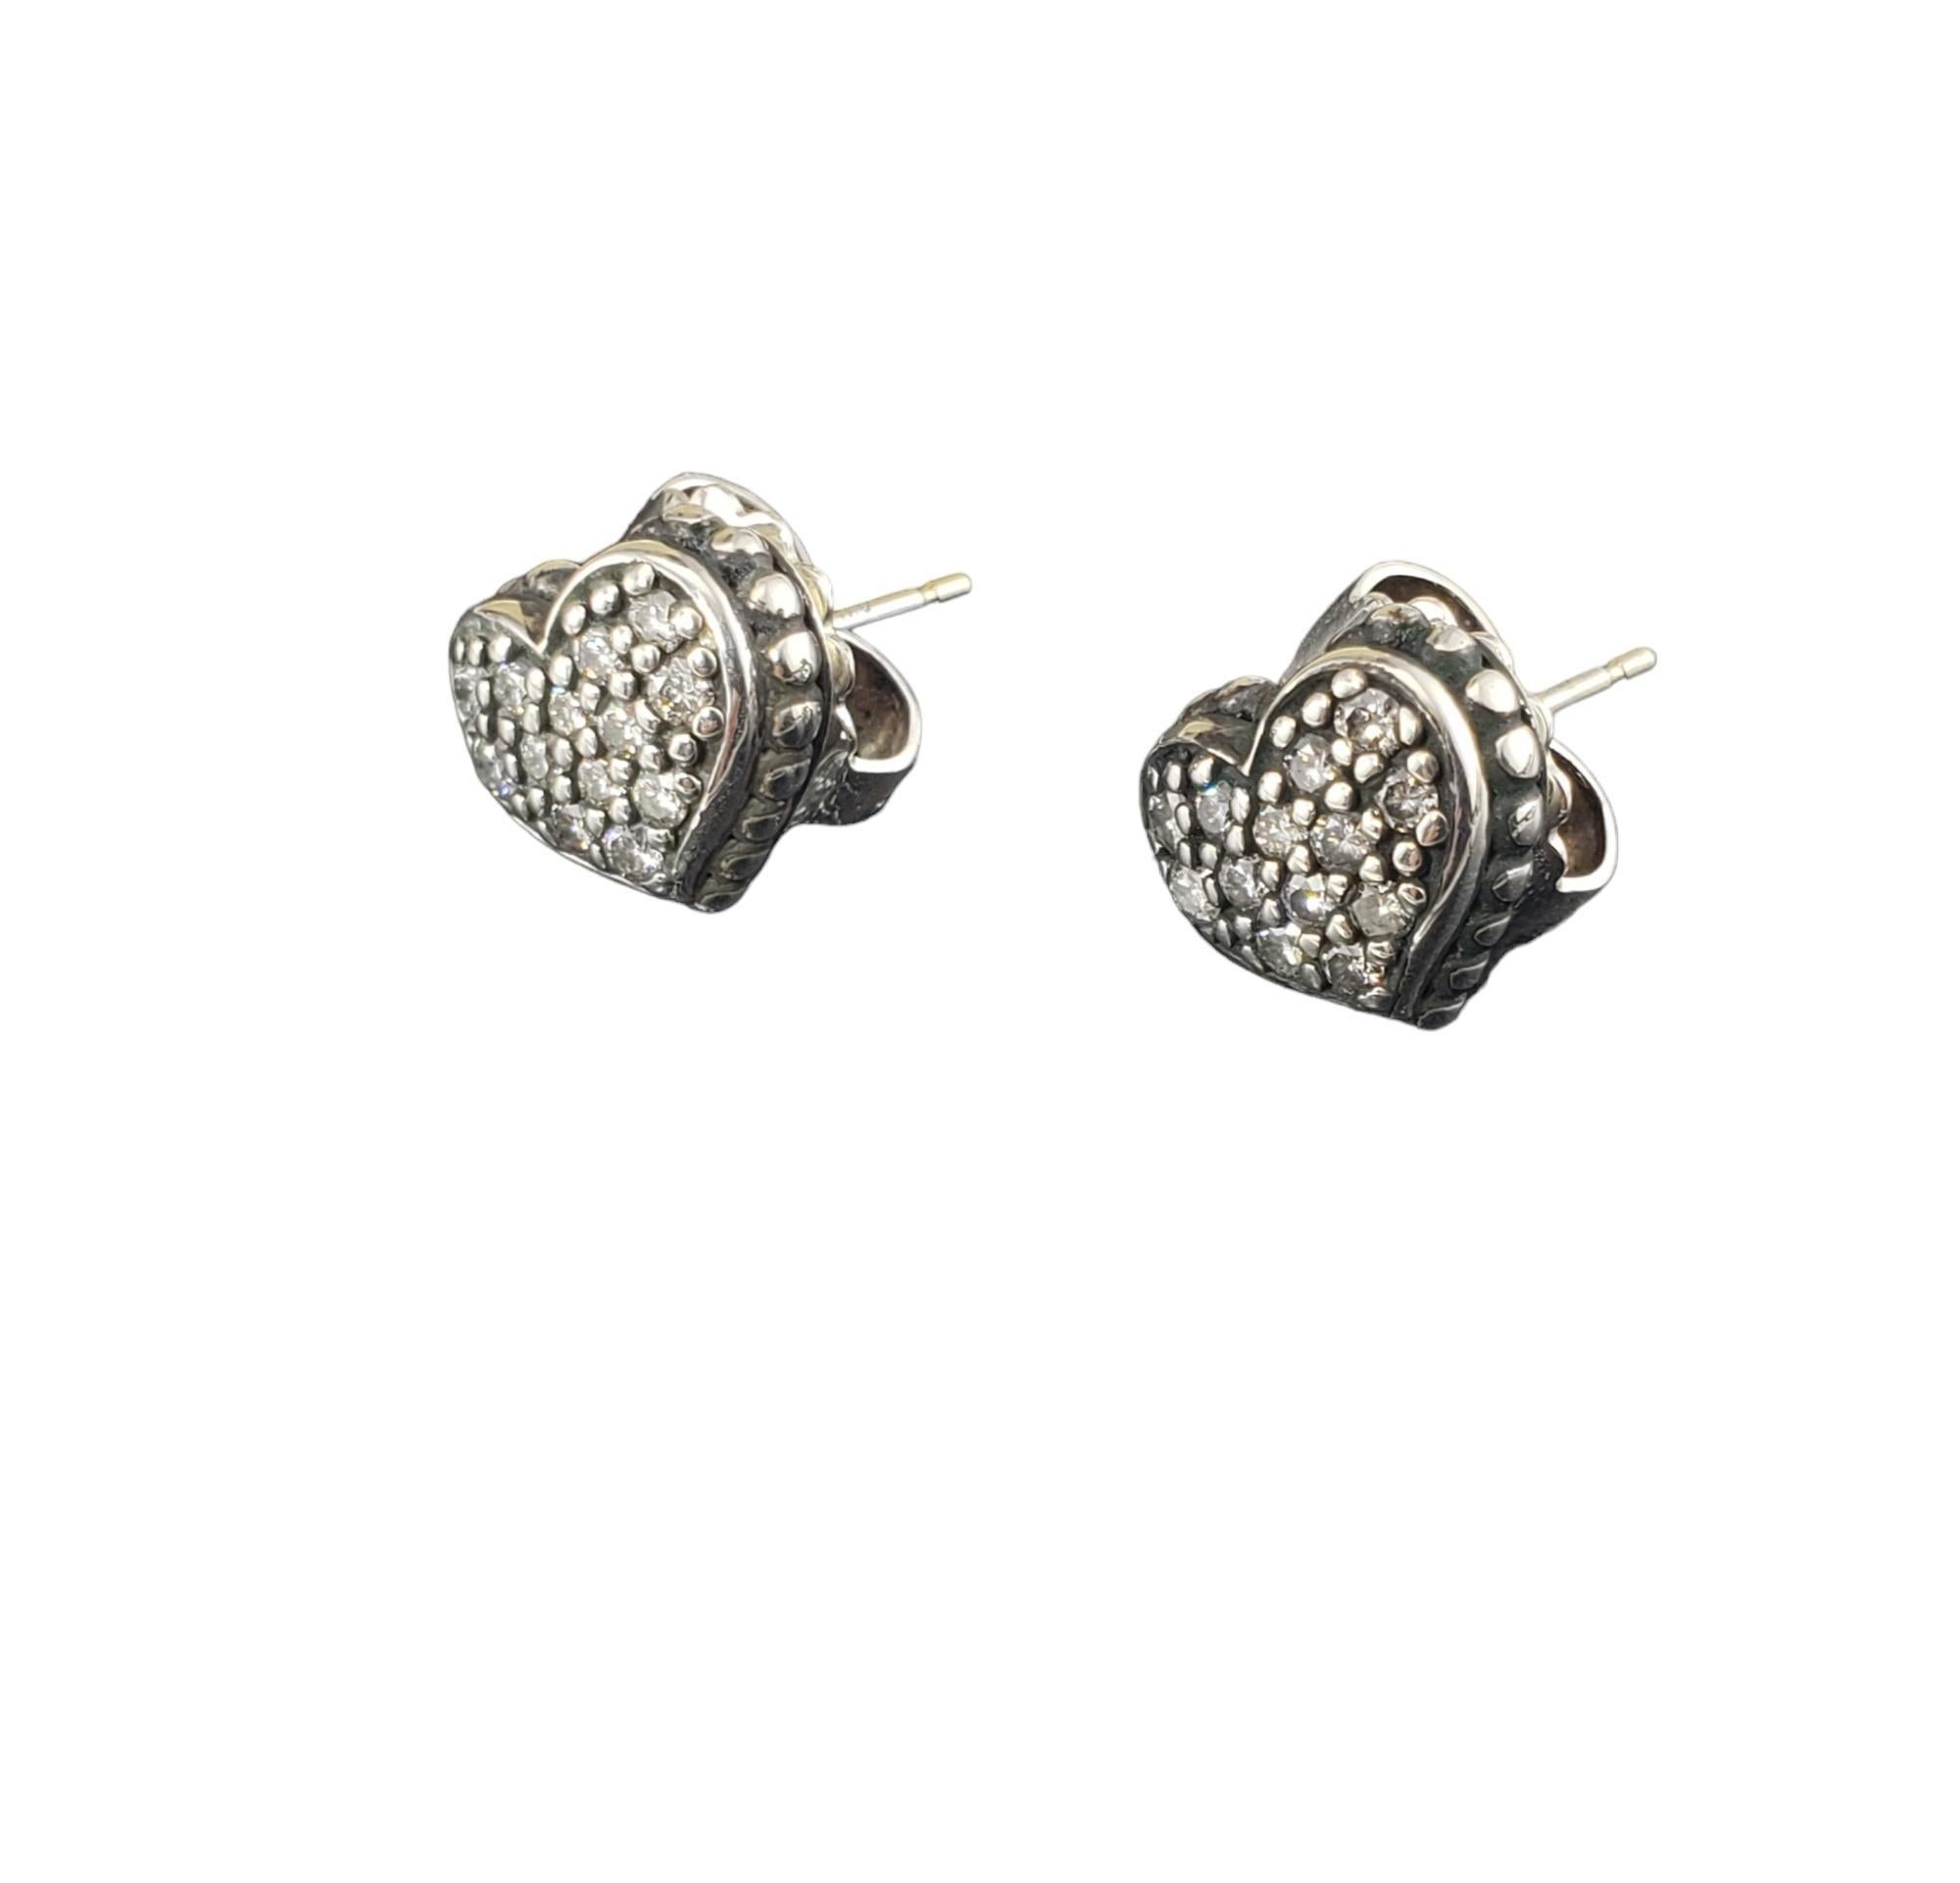 Vintage Lagos Caviar Sterling Silver Diamond Heart Earrings-

These lovely heart earrings each feature 13 round brilliant cut diamonds set in beautifully detailed sterling silver.  Push back closures.

Size: 10 mm x 12 mm

Stamped: Caviar 